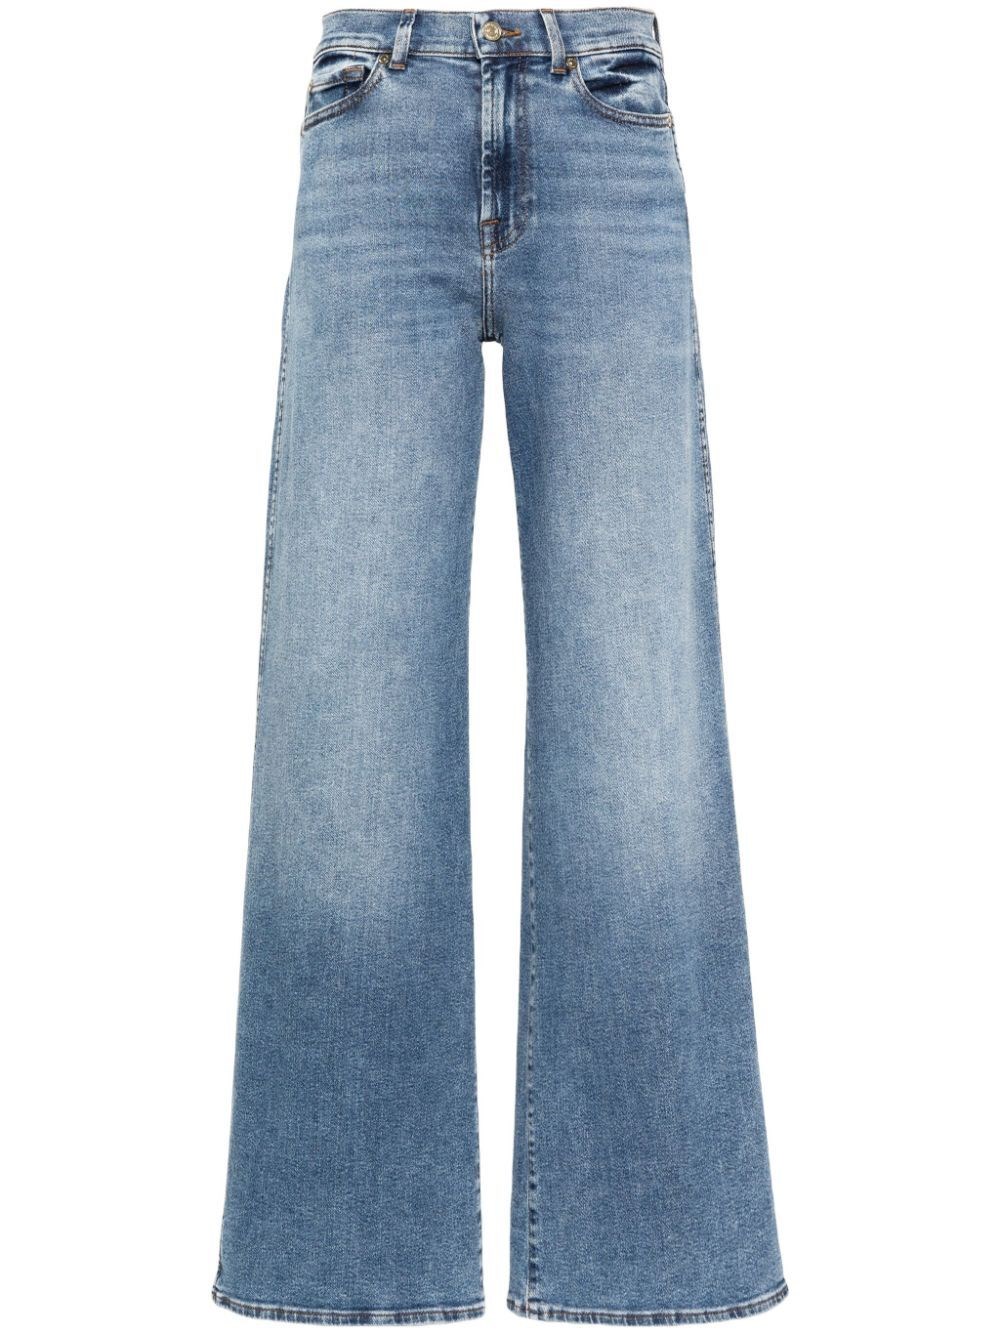 7 FOR ALL MANKIND `LOTTA LUXE VINTAGE LOVE SOUL` JEANS